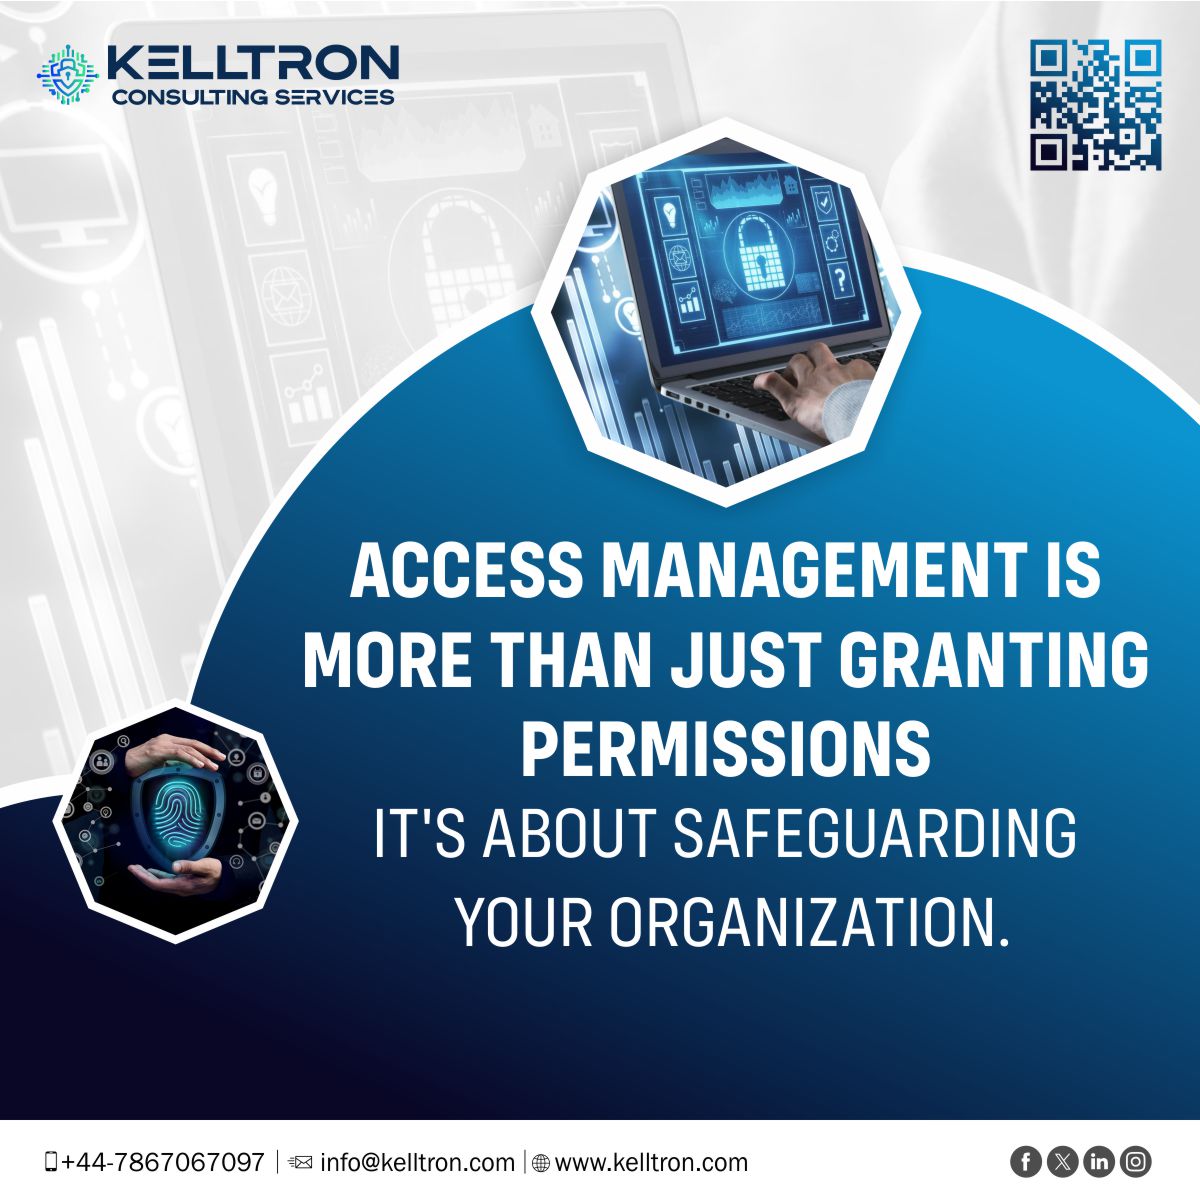 Protect your business with Kelltron's Access Management solutions.
Contact us today to learn more at kelltron.com

#Kelltron #IdentityManagement #UniqueIdentity #PersonalizedSecurity #identity #security #safety #theft #vapt #identityaccess